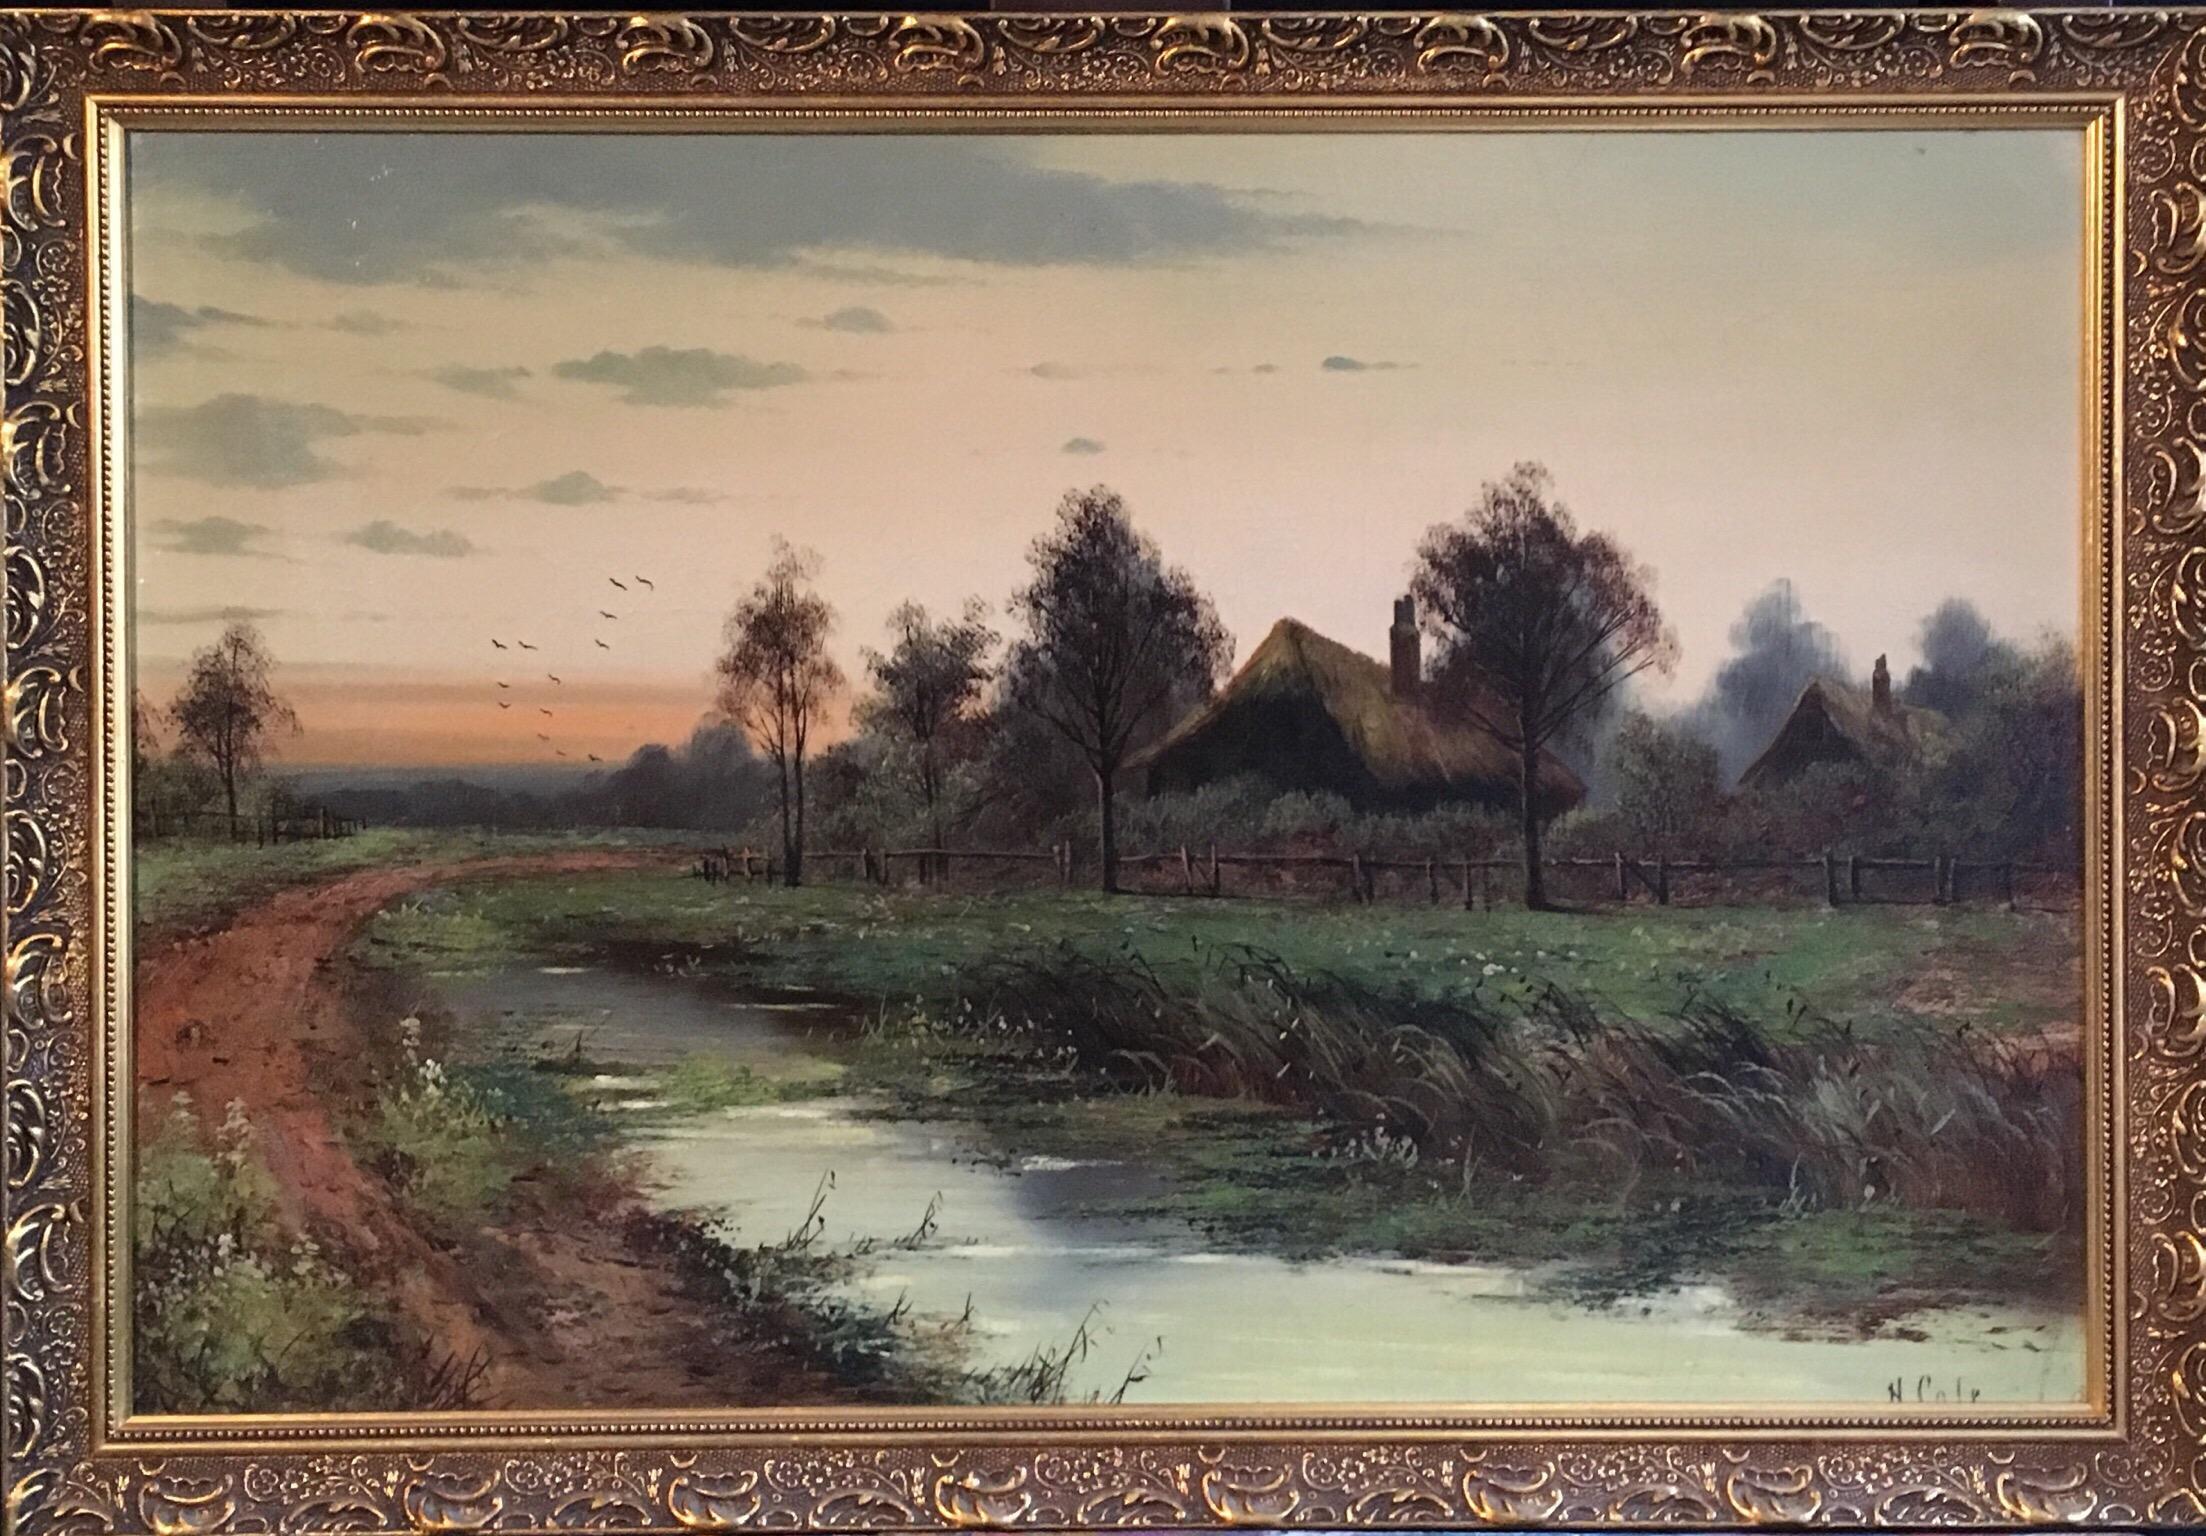 N.Cole Landscape Painting - Rural Sunset Antique English Original Signed Oil Painting